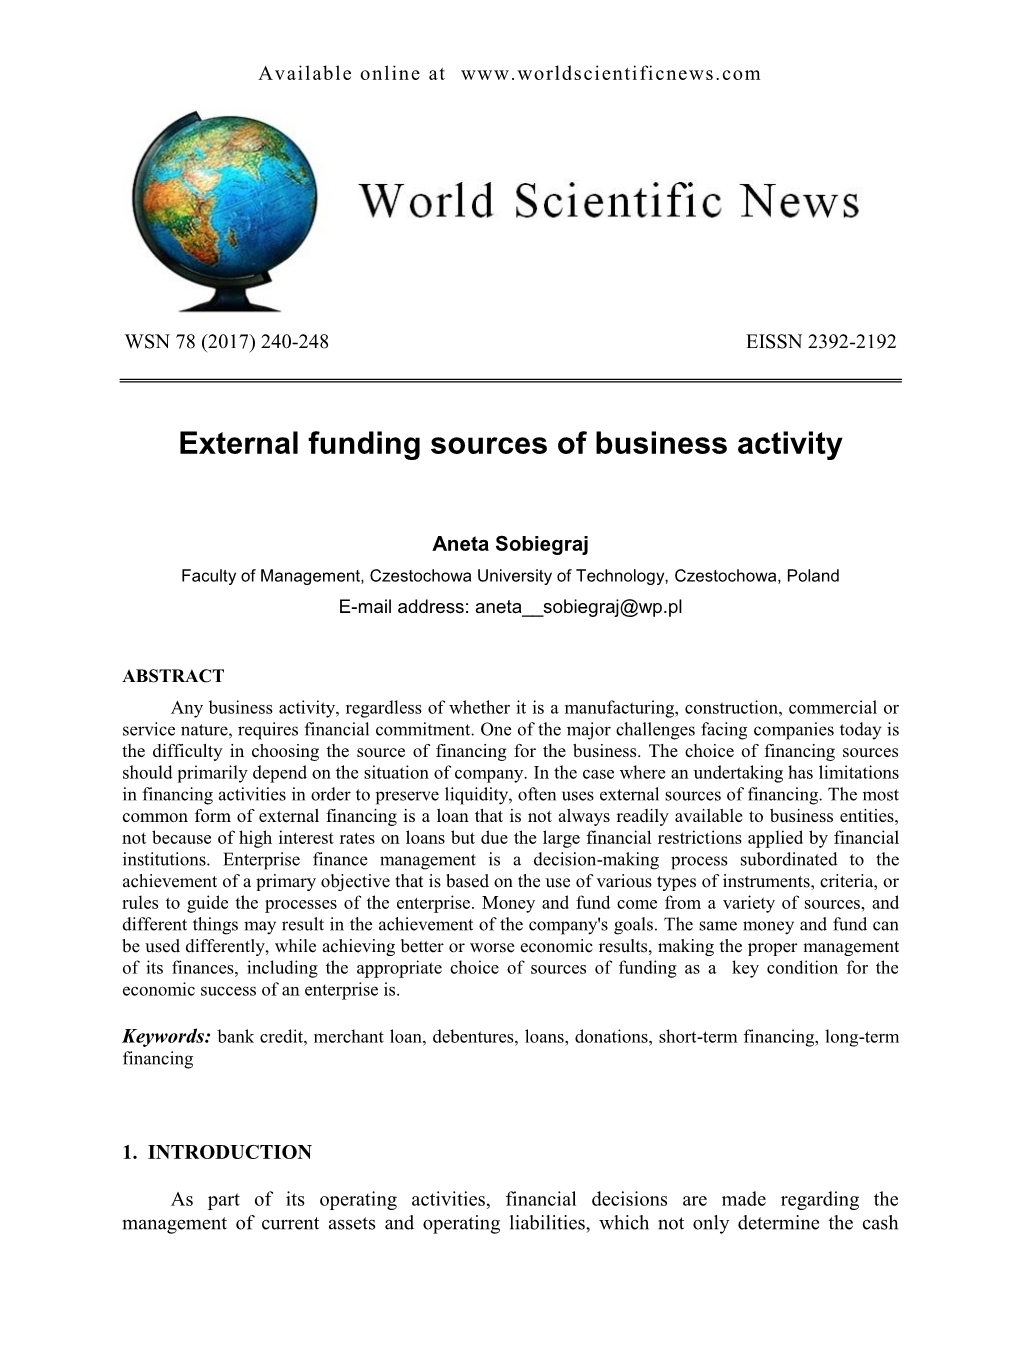 External Funding Sources of Business Activity